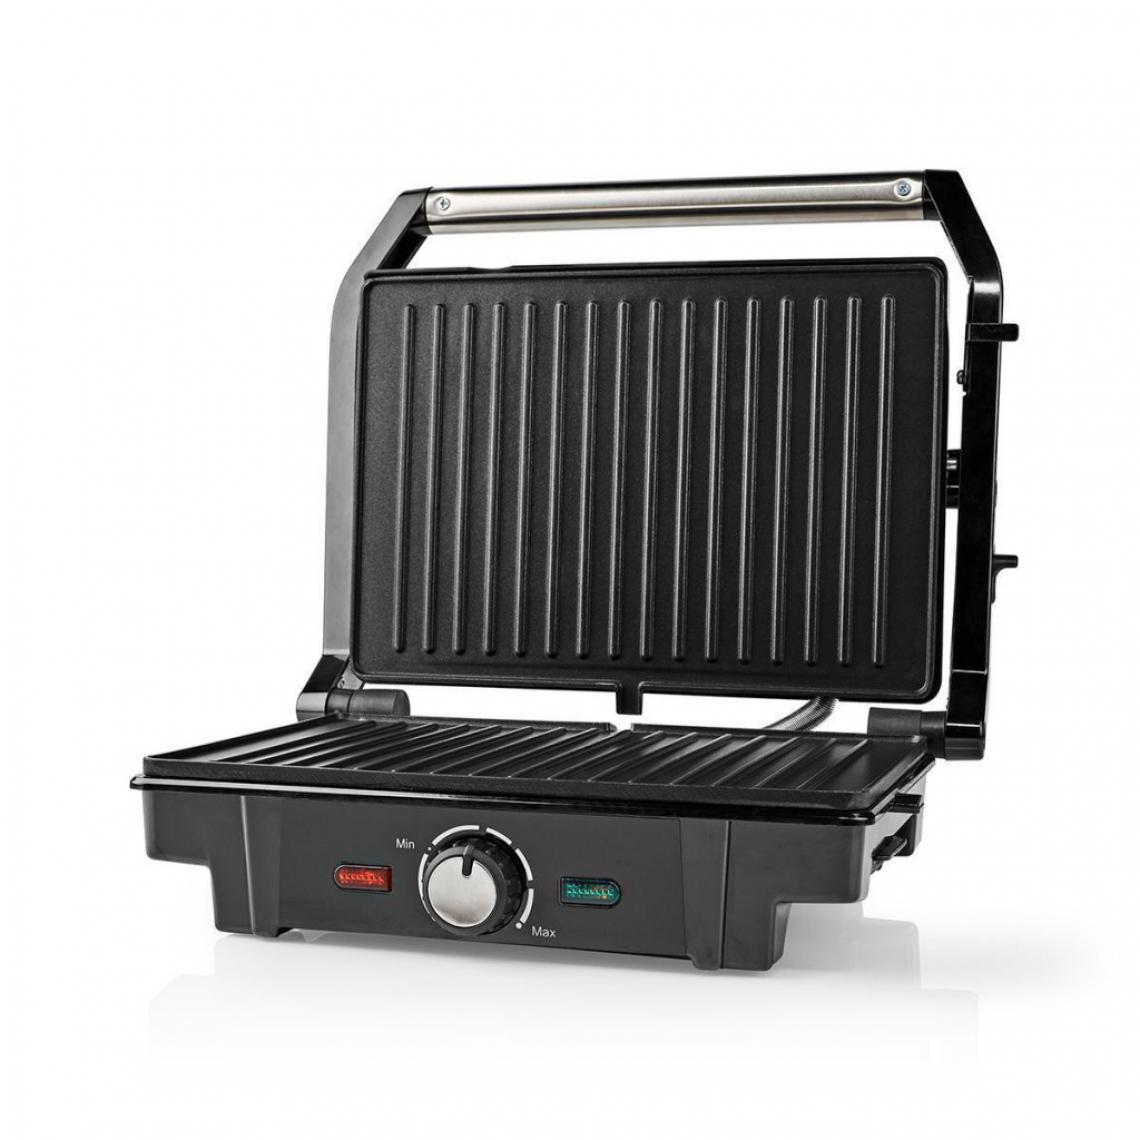 Alpexe - Gril compact | 1 600 W | Aluminium - Grille-pain